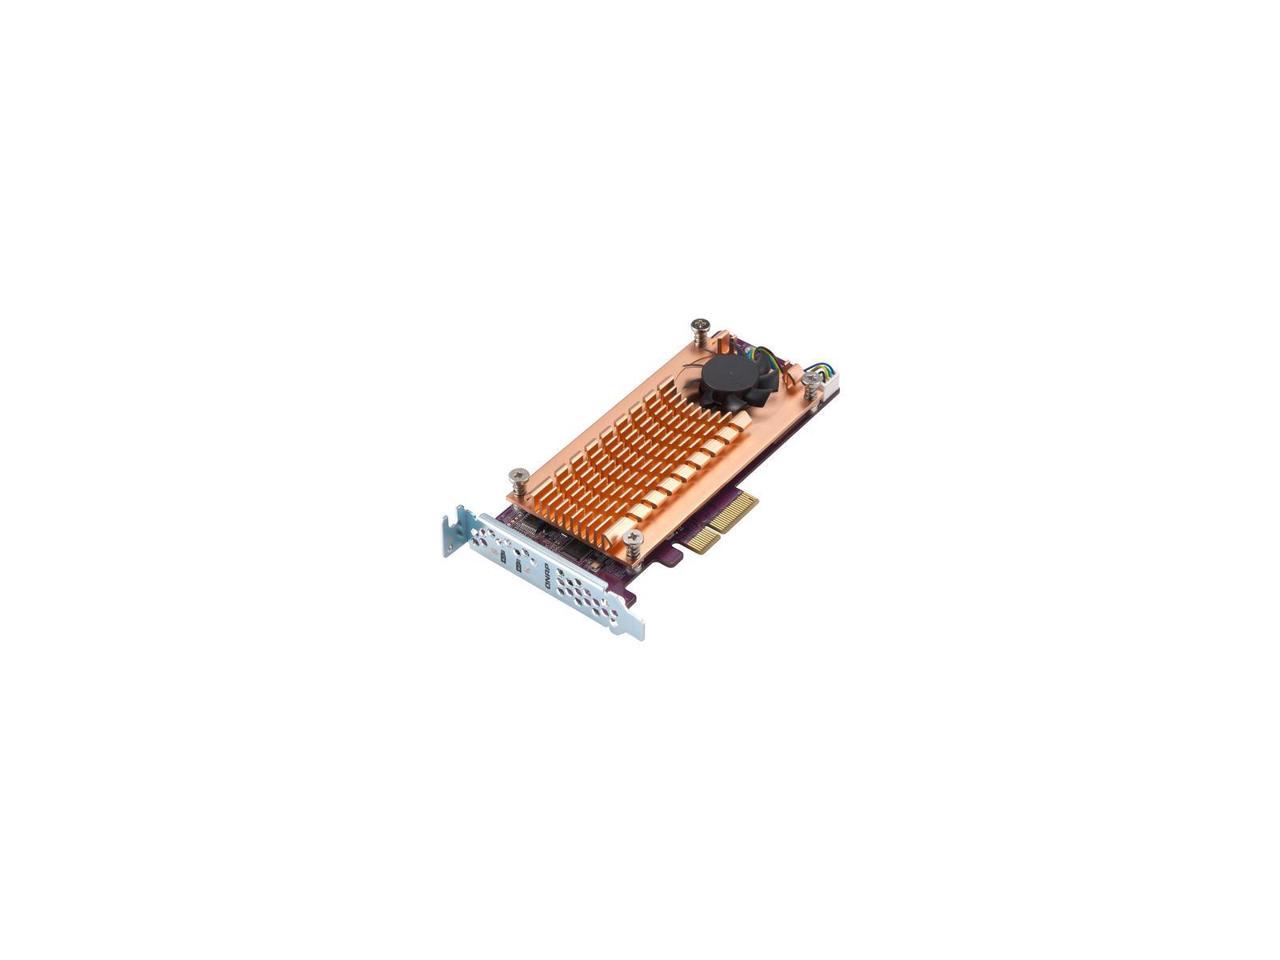 PCIe Gen2 X2 Low-Profile Flat and Full-Height are Bundled QNAP QM2-2S-220A Dual M.2 22110/2280 SATA SSD Expansion Card Low-Profile Bracket Pre-Loaded 